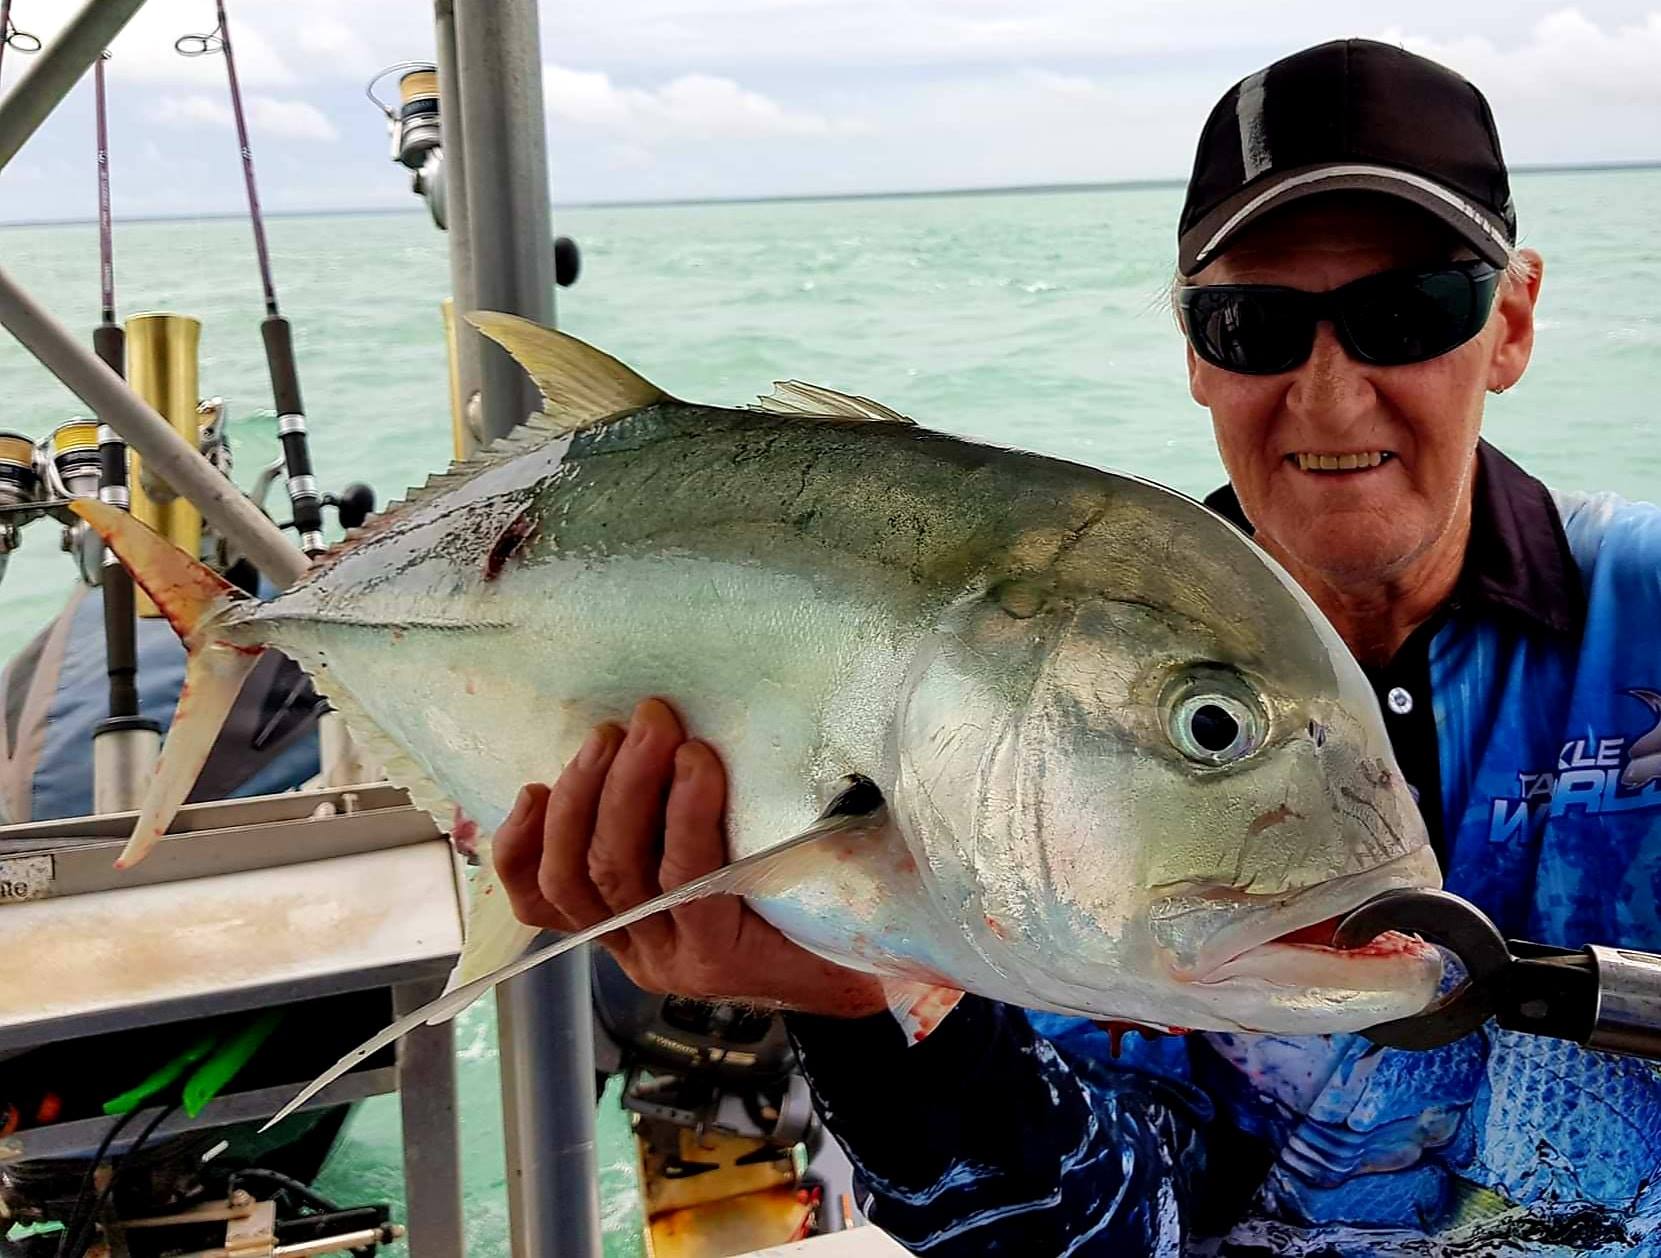 Trevally caught on a jig with Offshore Boats fishing charters